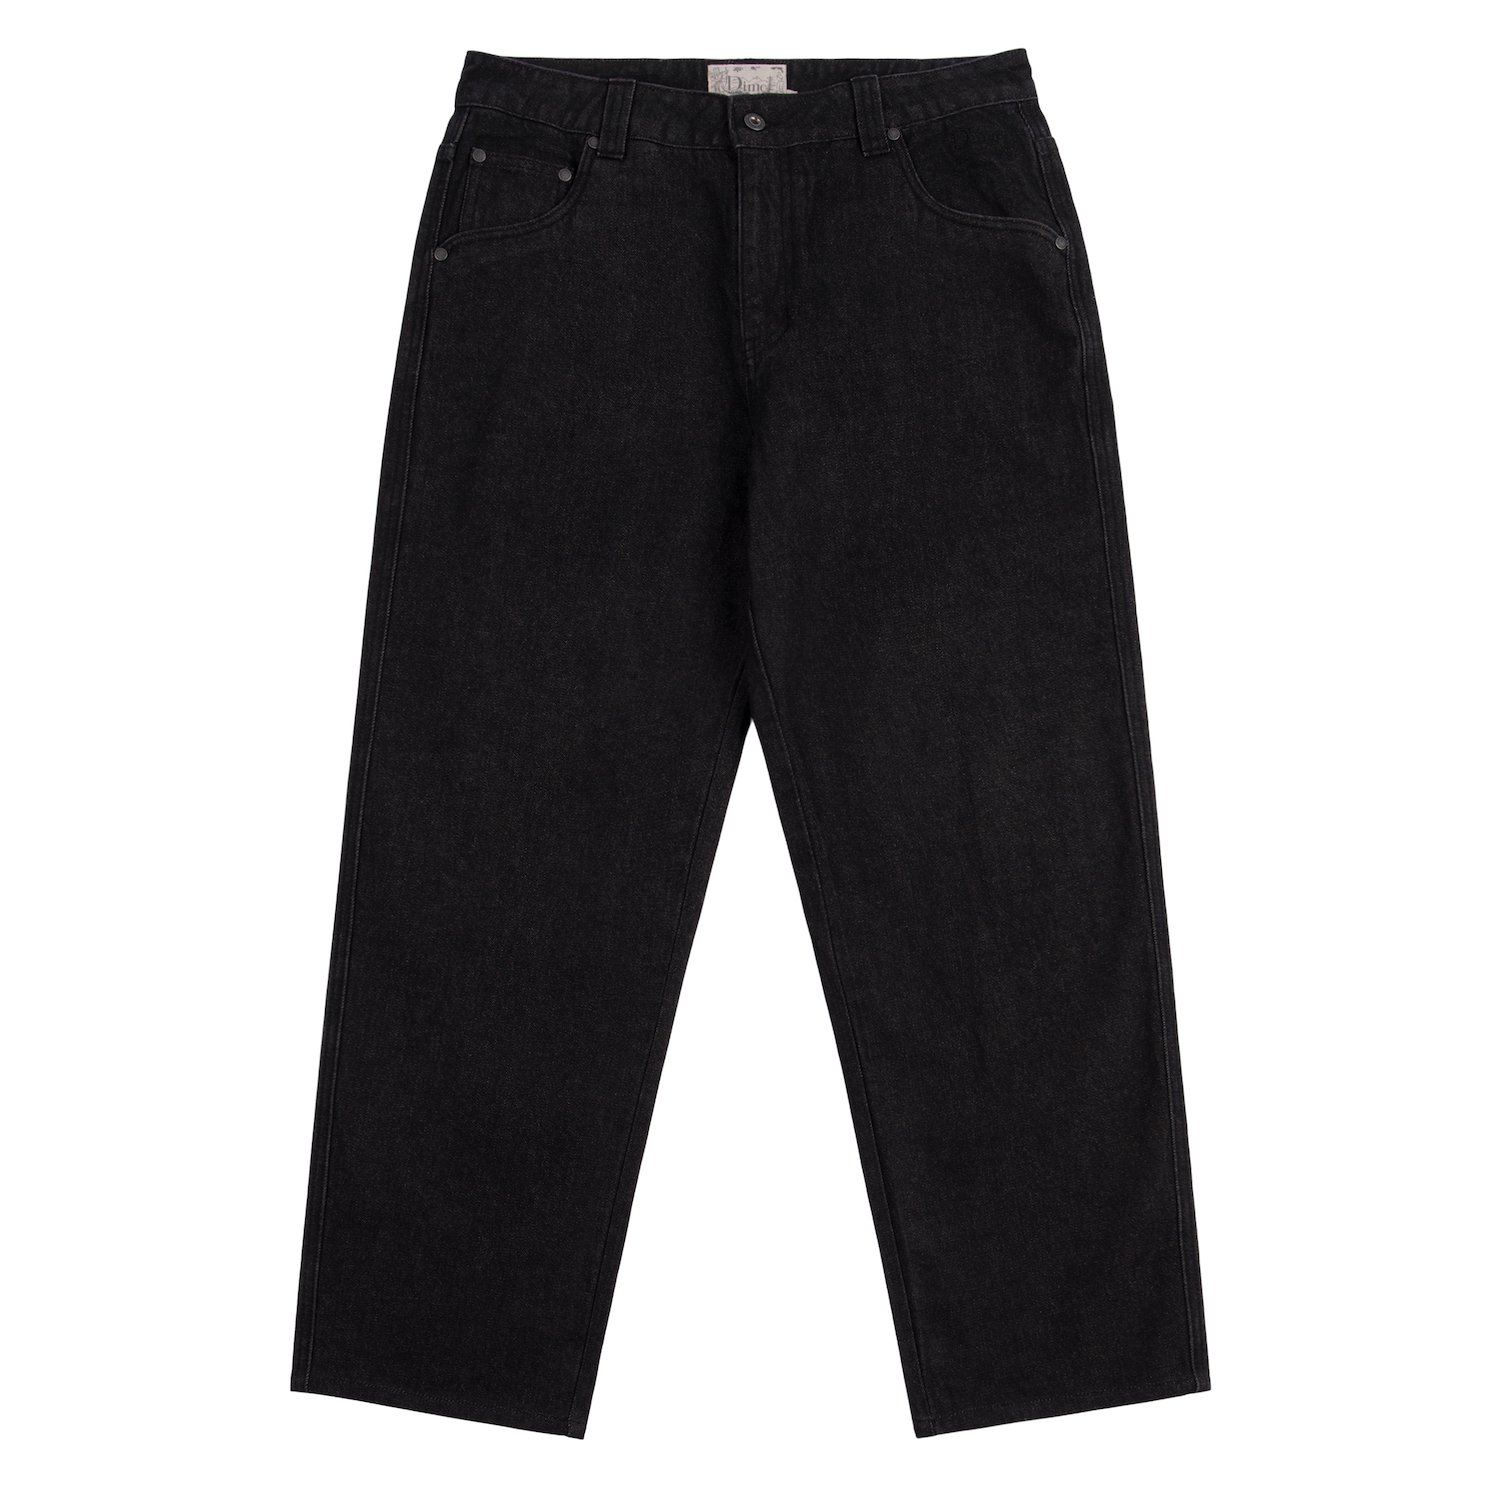 DIME<br>DIME RELAXED DENIM PANTS<br>